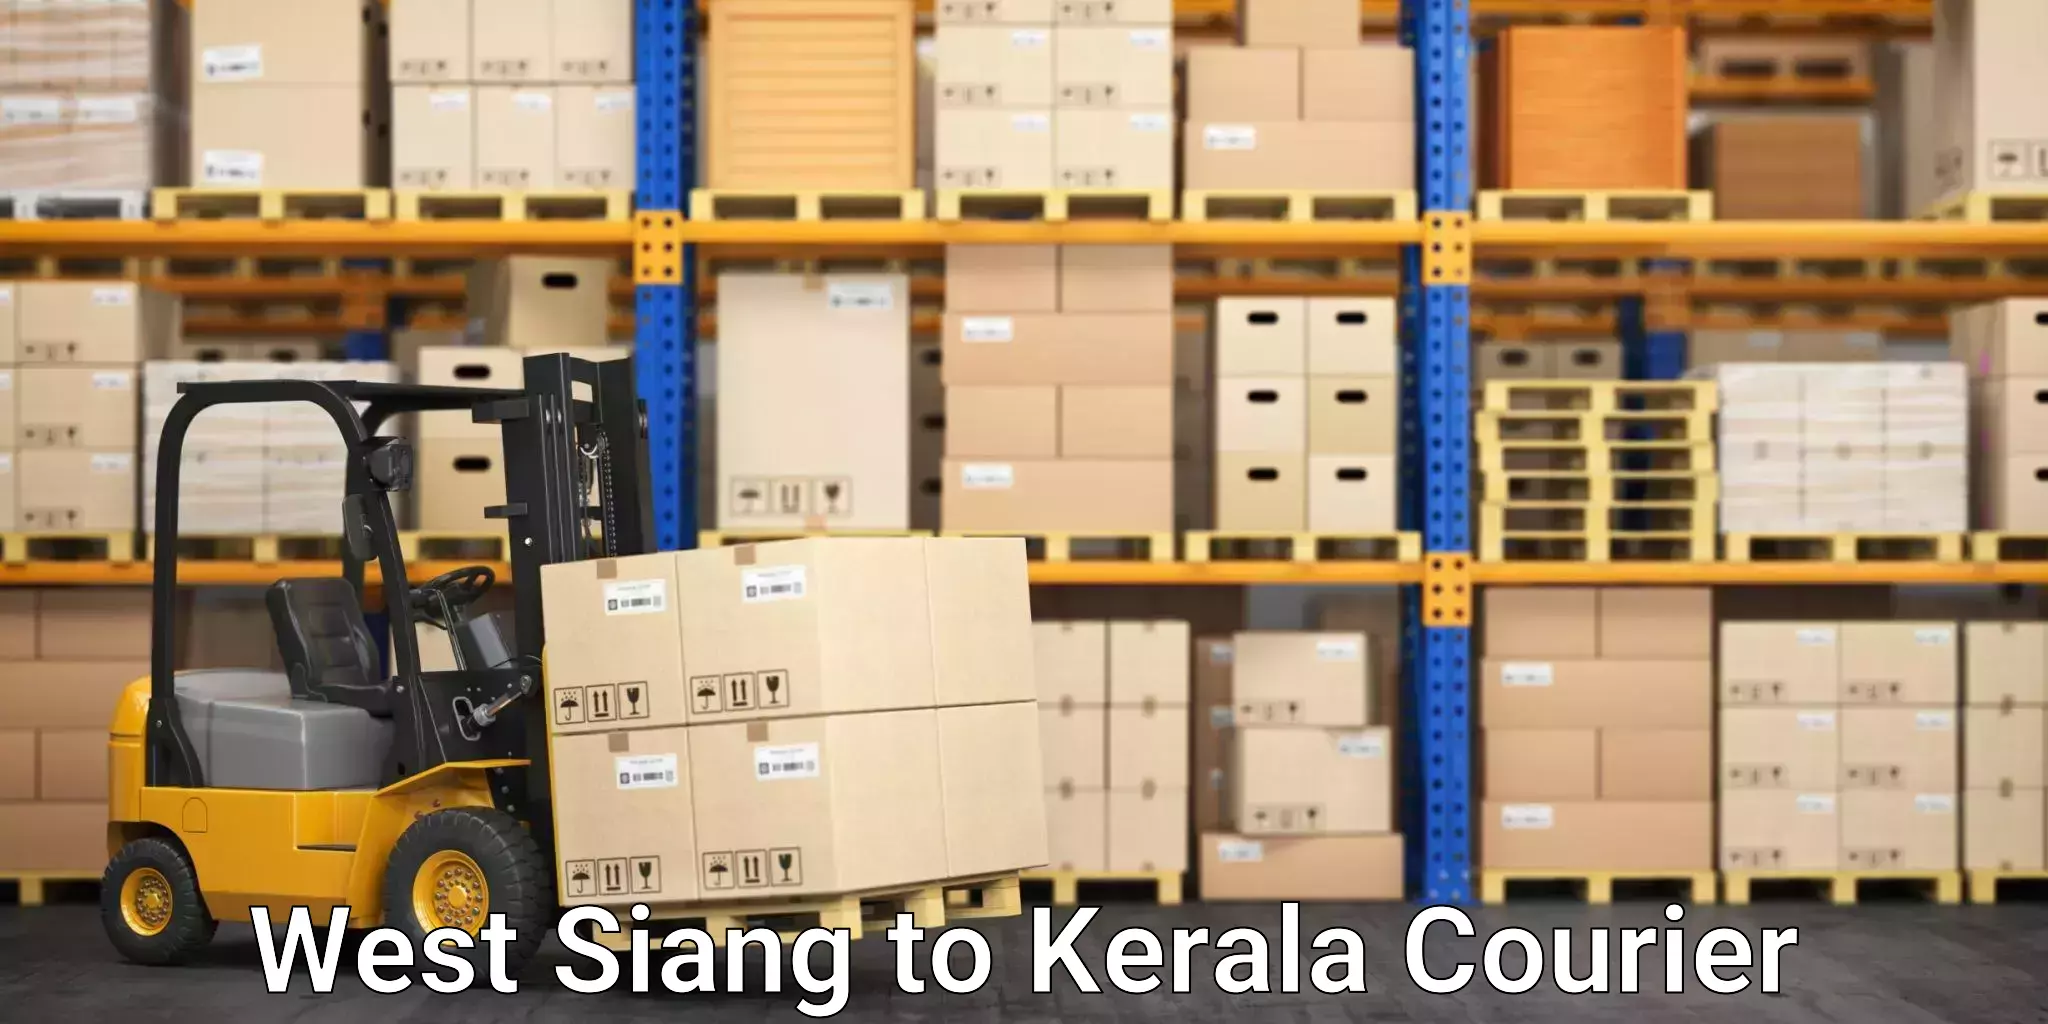 Efficient order fulfillment West Siang to Kottayam